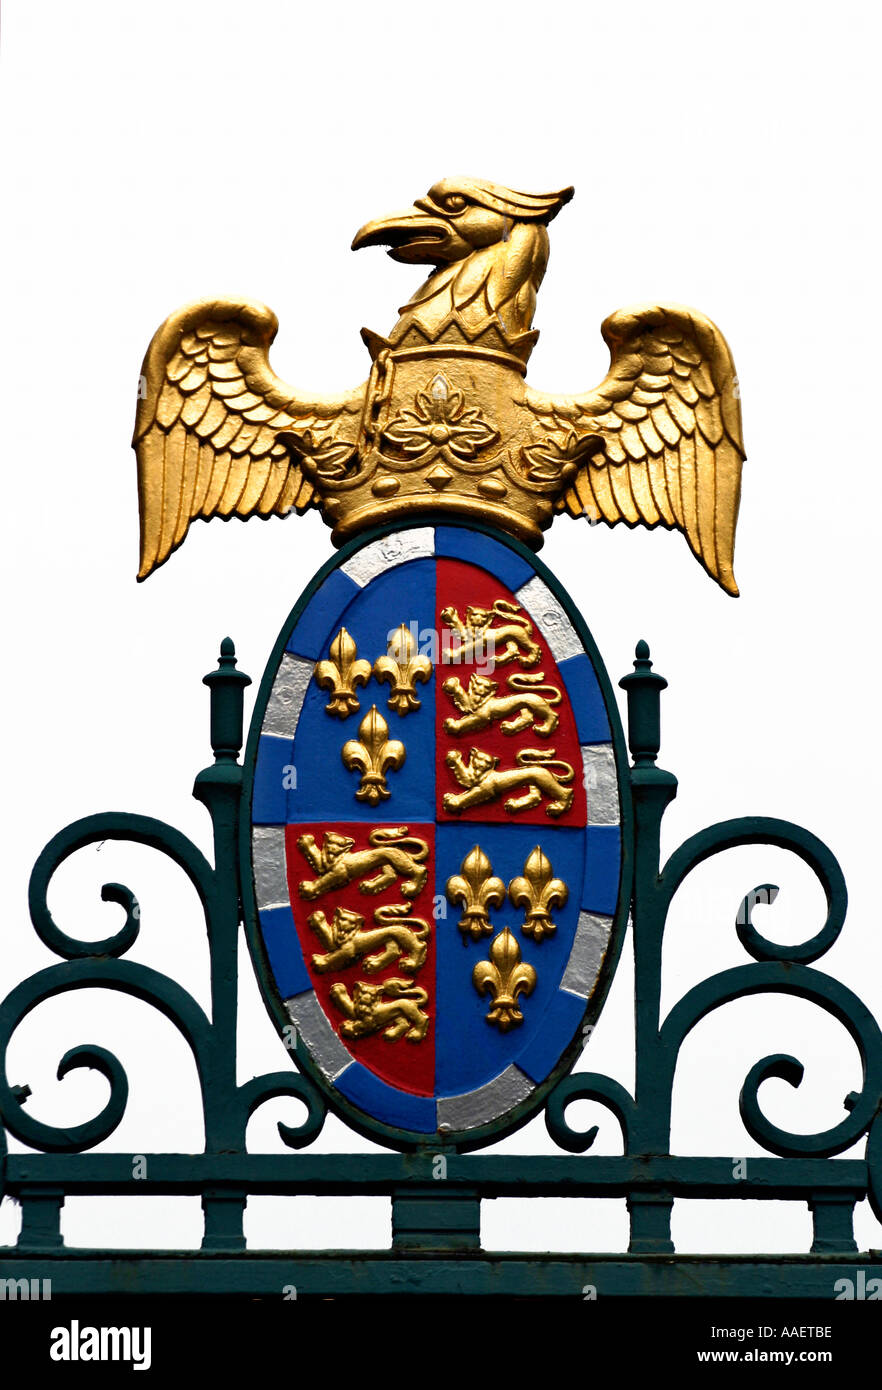 St John's College Coat of Arms shown as a cut-out on white background Stock Photo